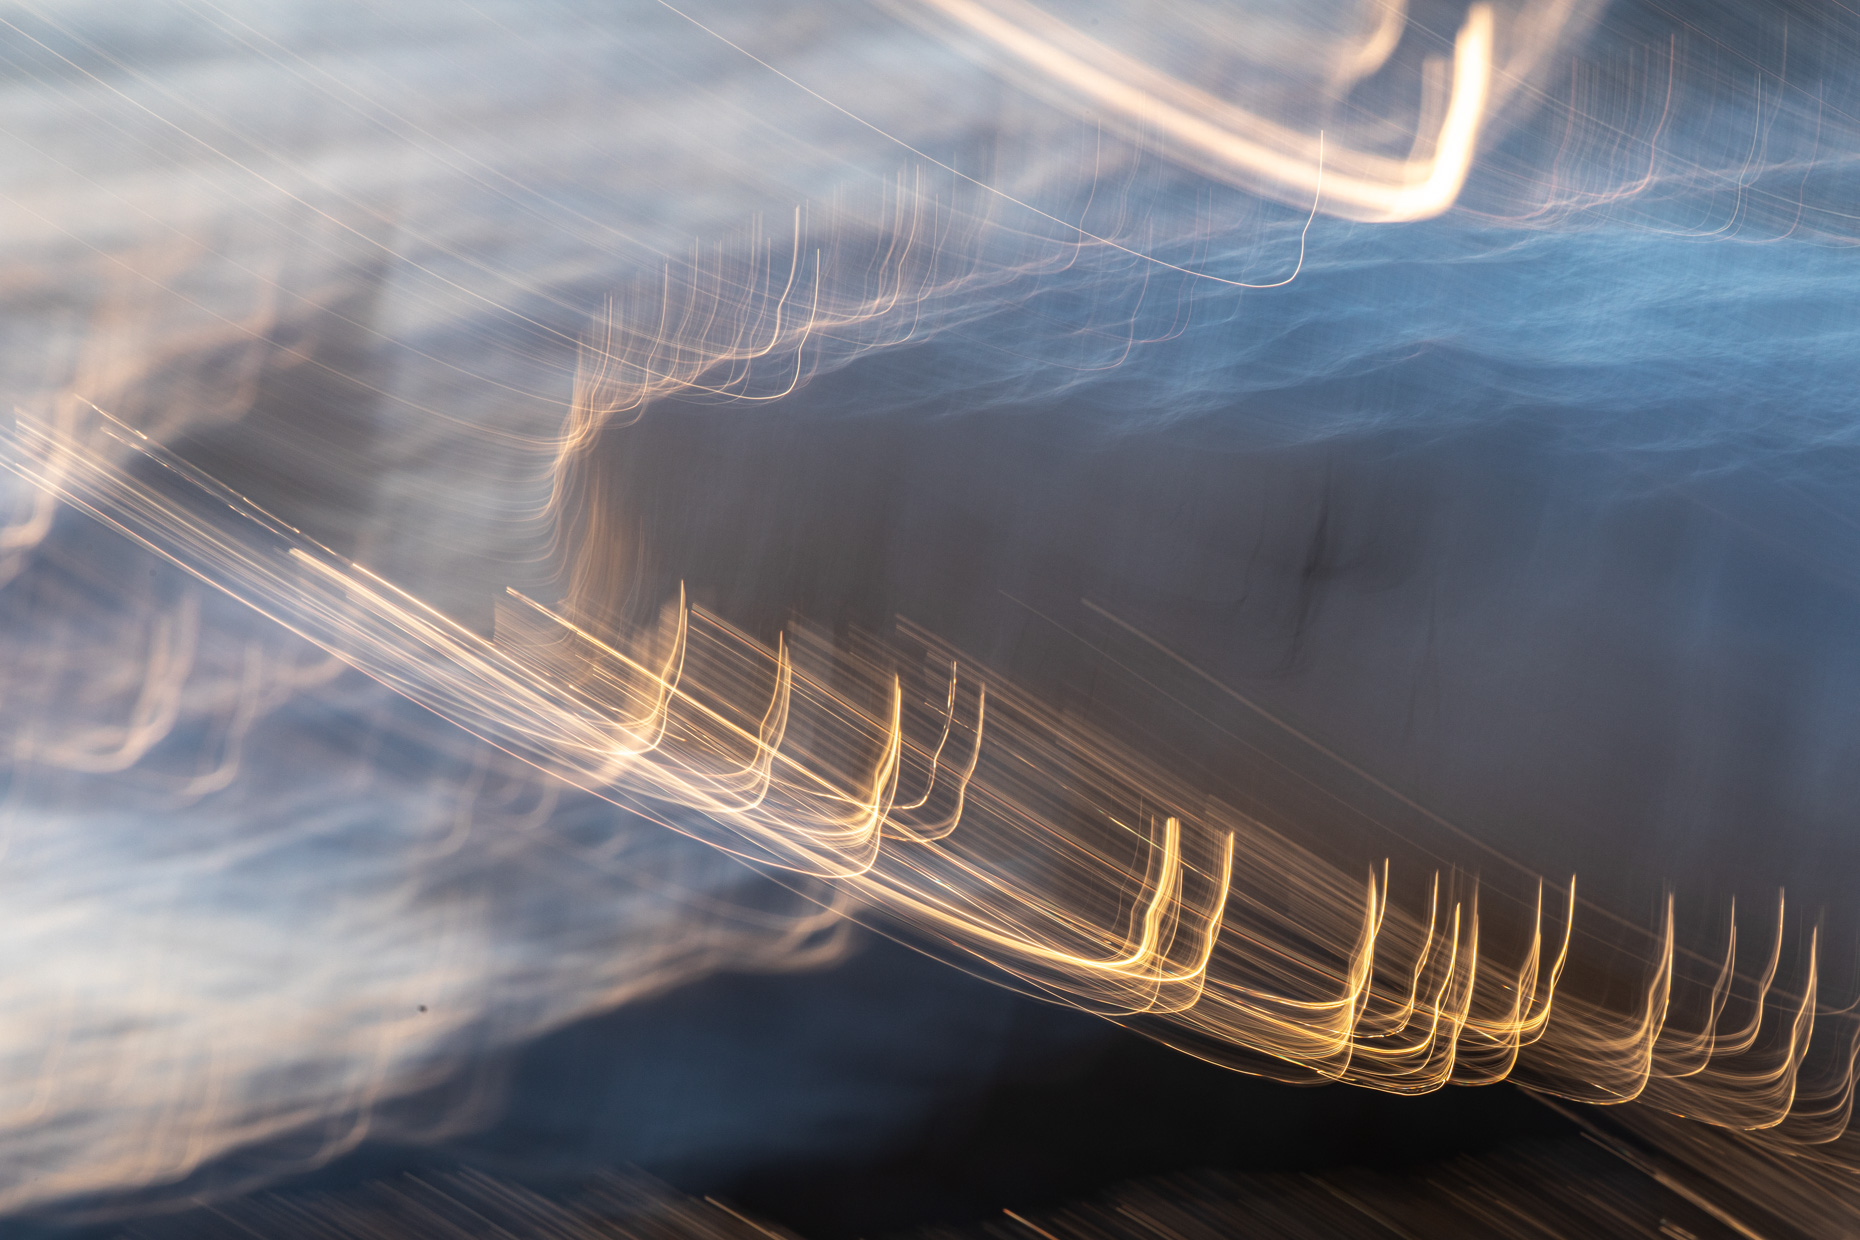 climate_change_winter_ice_Saint_Lawrence_River_Quebec_ICM_intentional_camera_movement-2